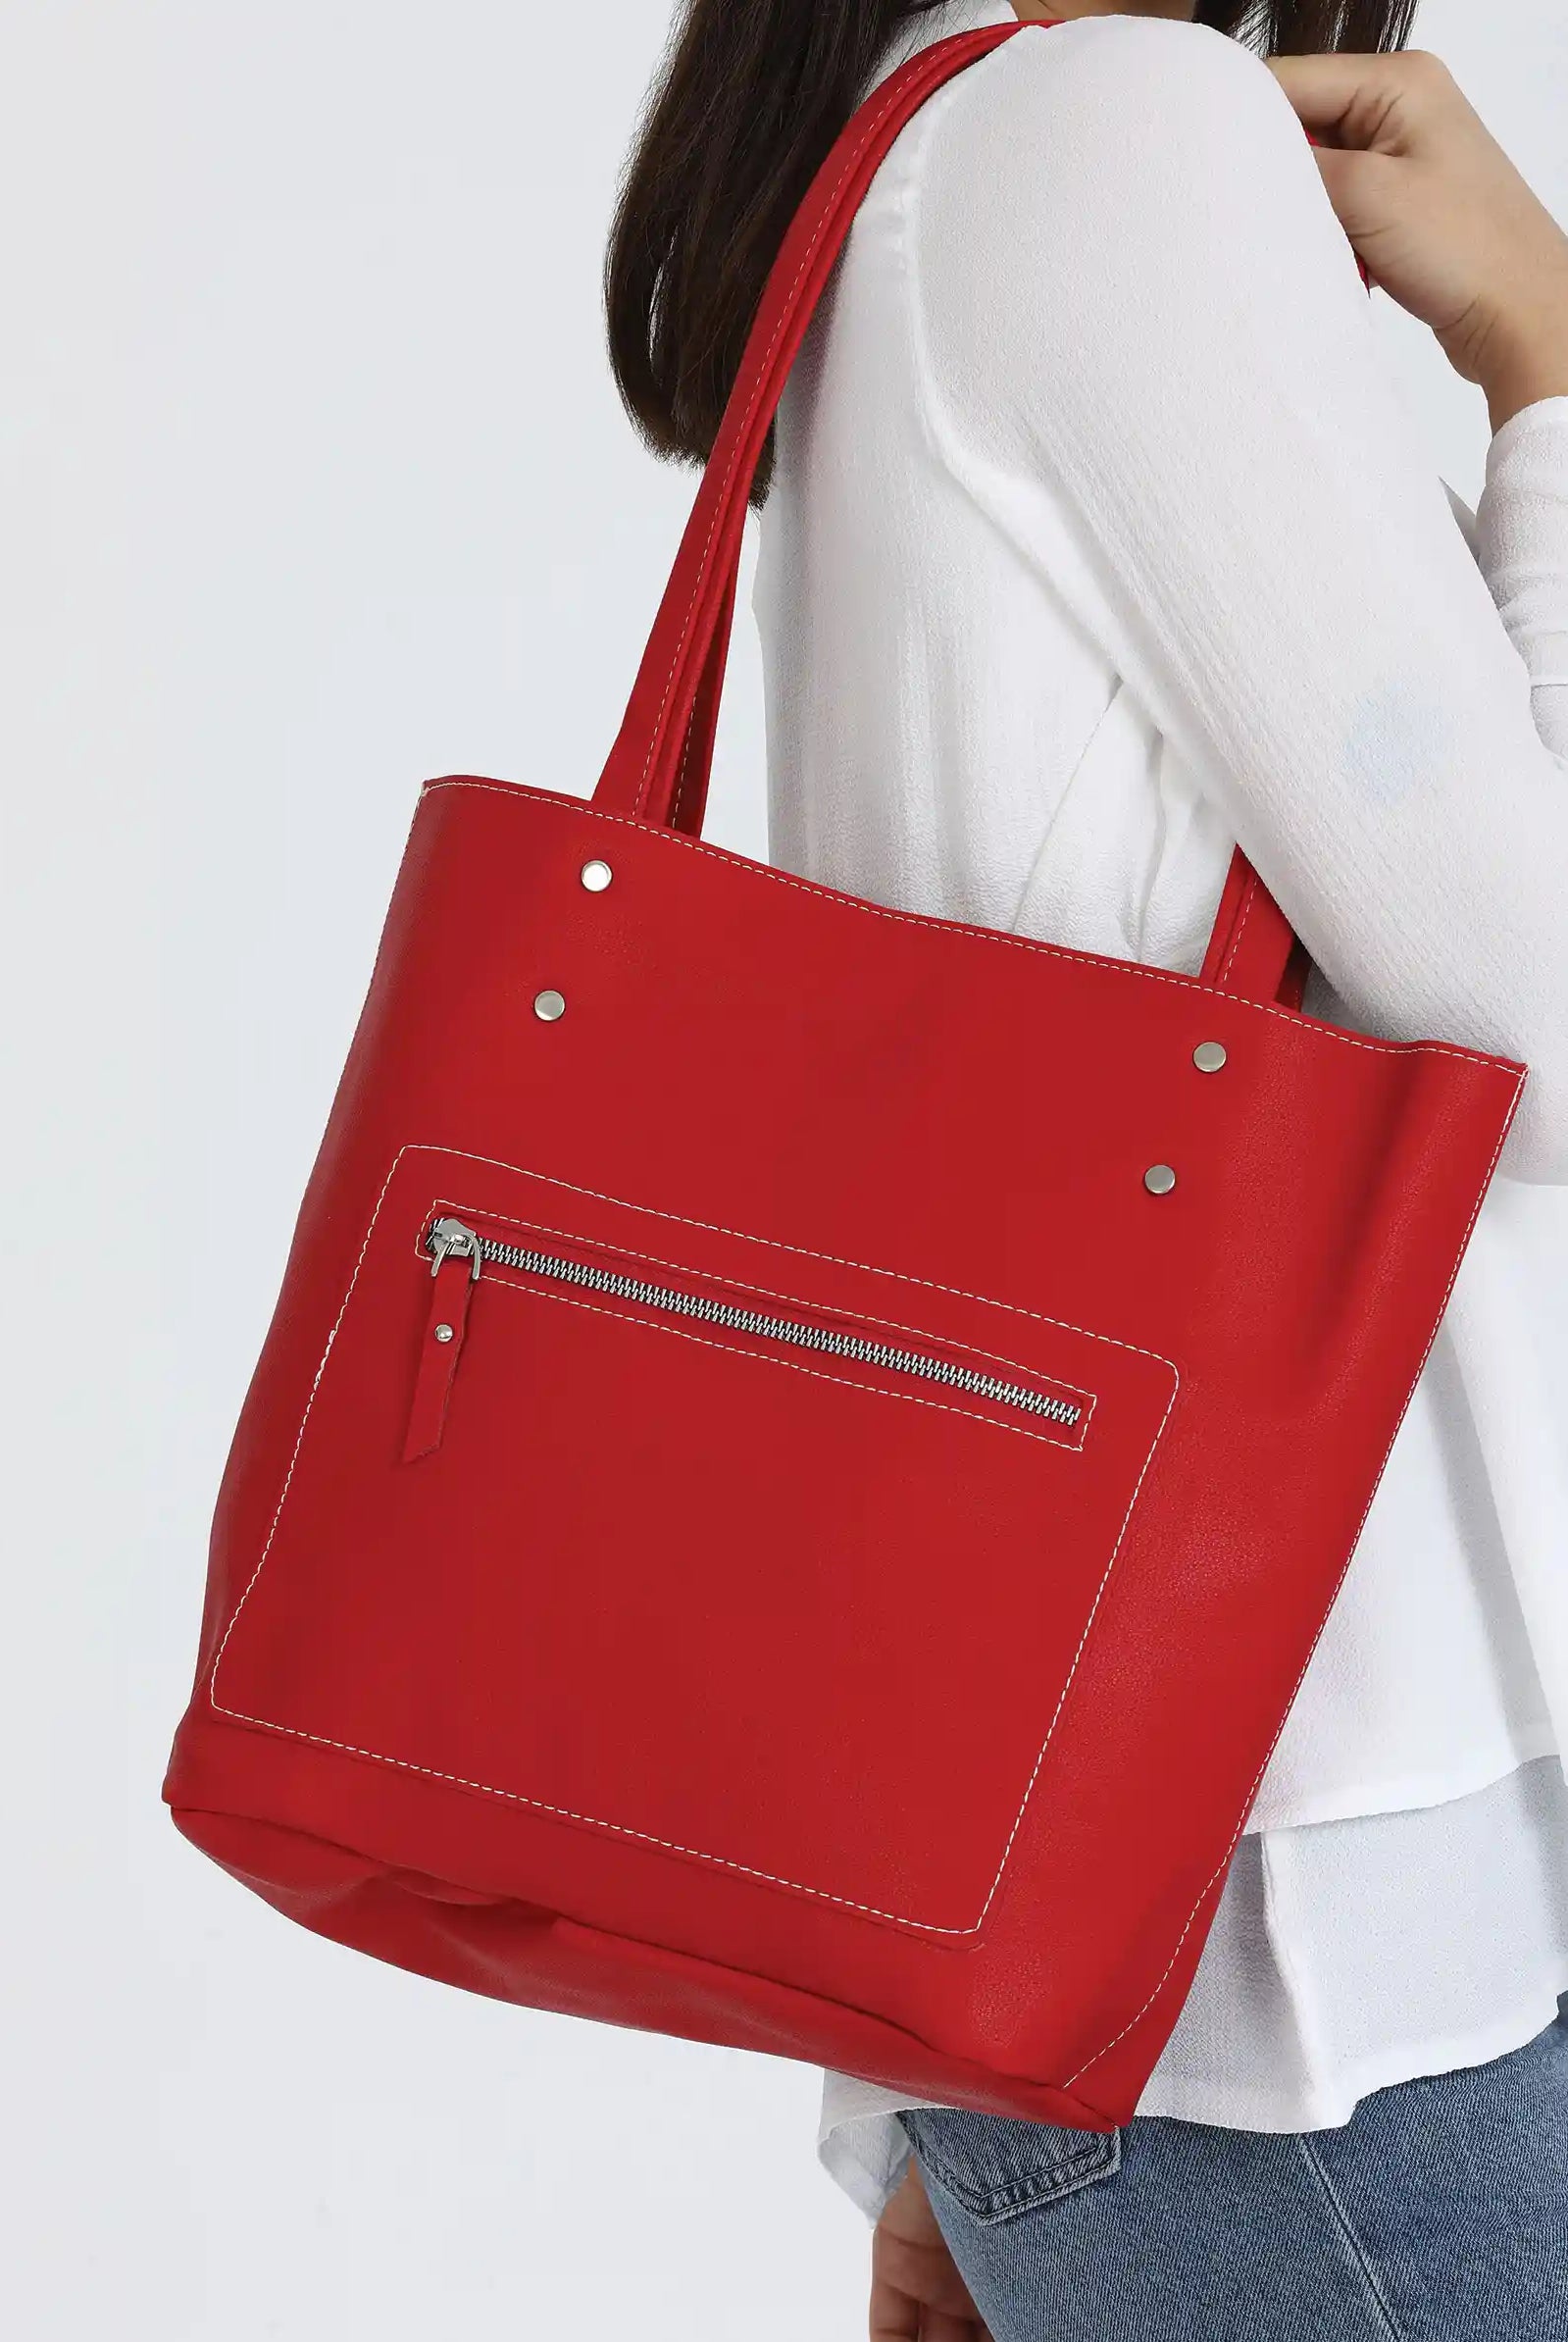 red leather tote bag